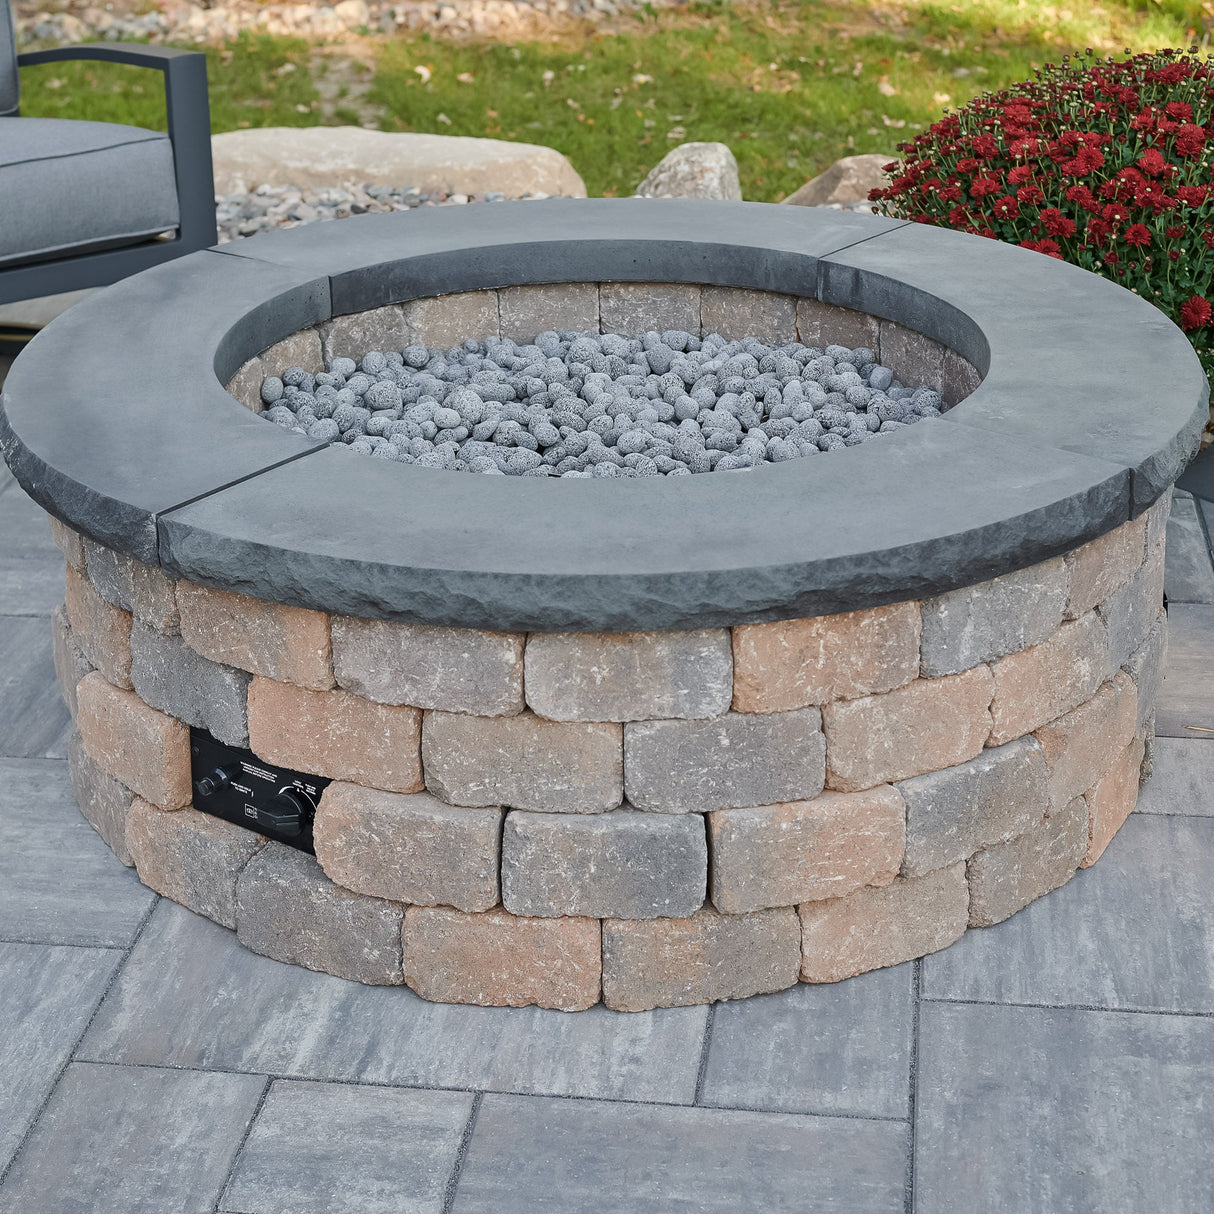 A close up of the Bronson Block Round Gas Fire Pit Kit and its control panel